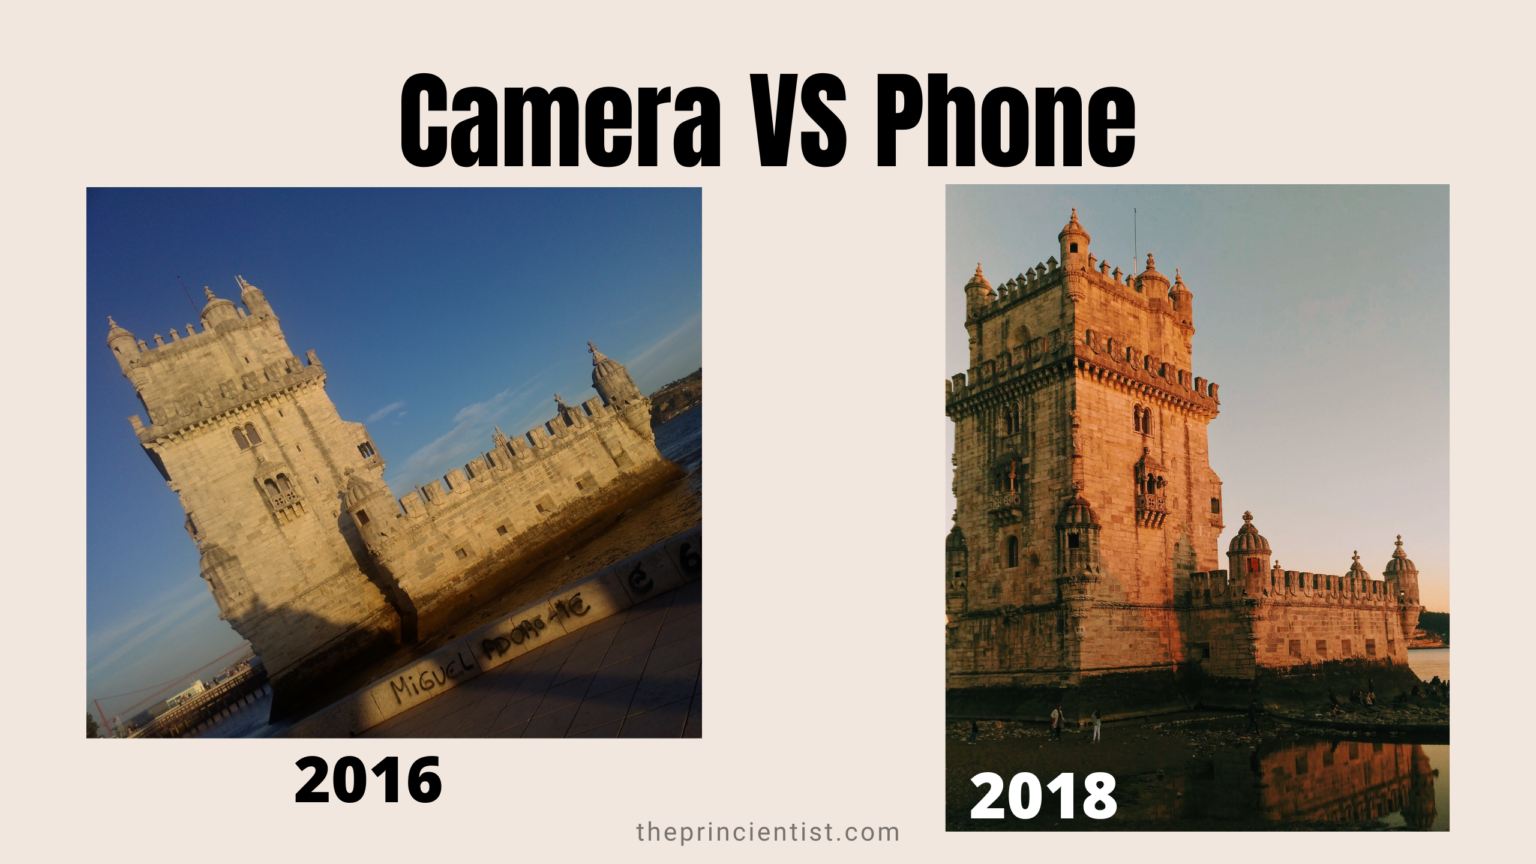 camera vs phone - progress over tme. 2 photos one from 2016 and oe from 2018 looking much better